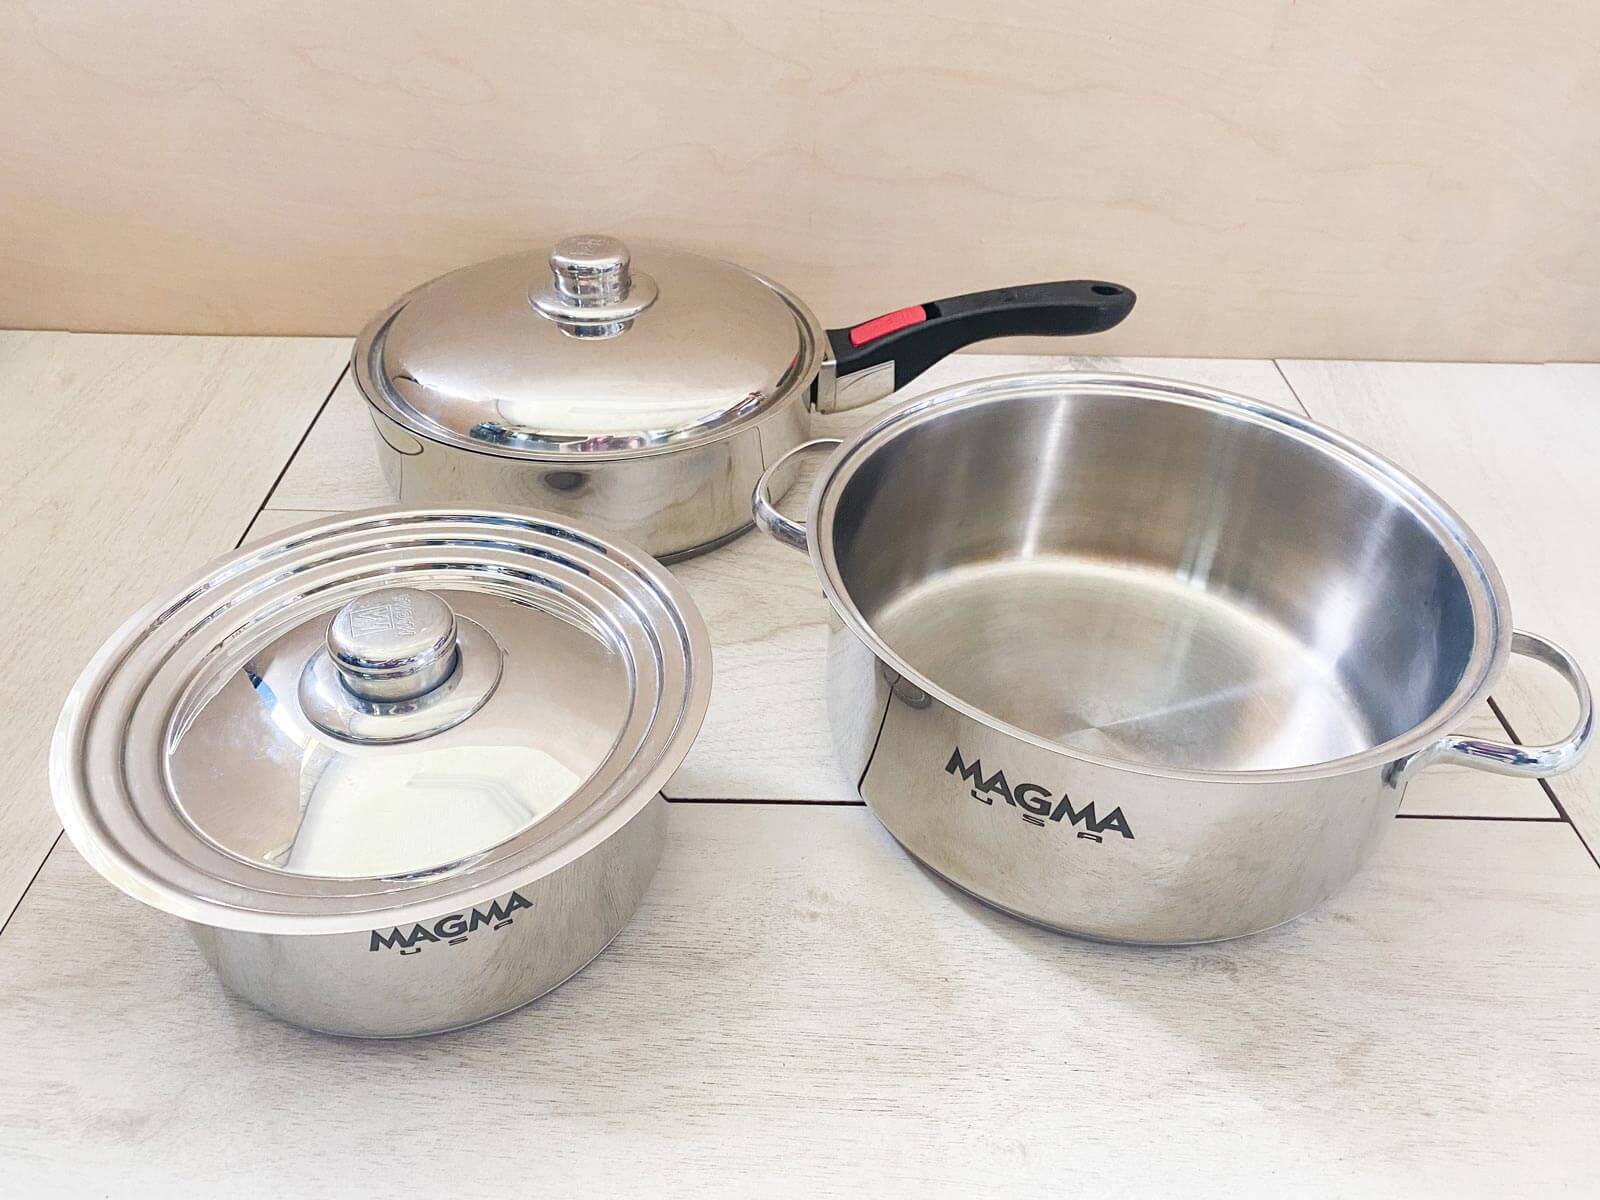 Set of Magma nesting pots with removable handles placed so you can see each piece of the set